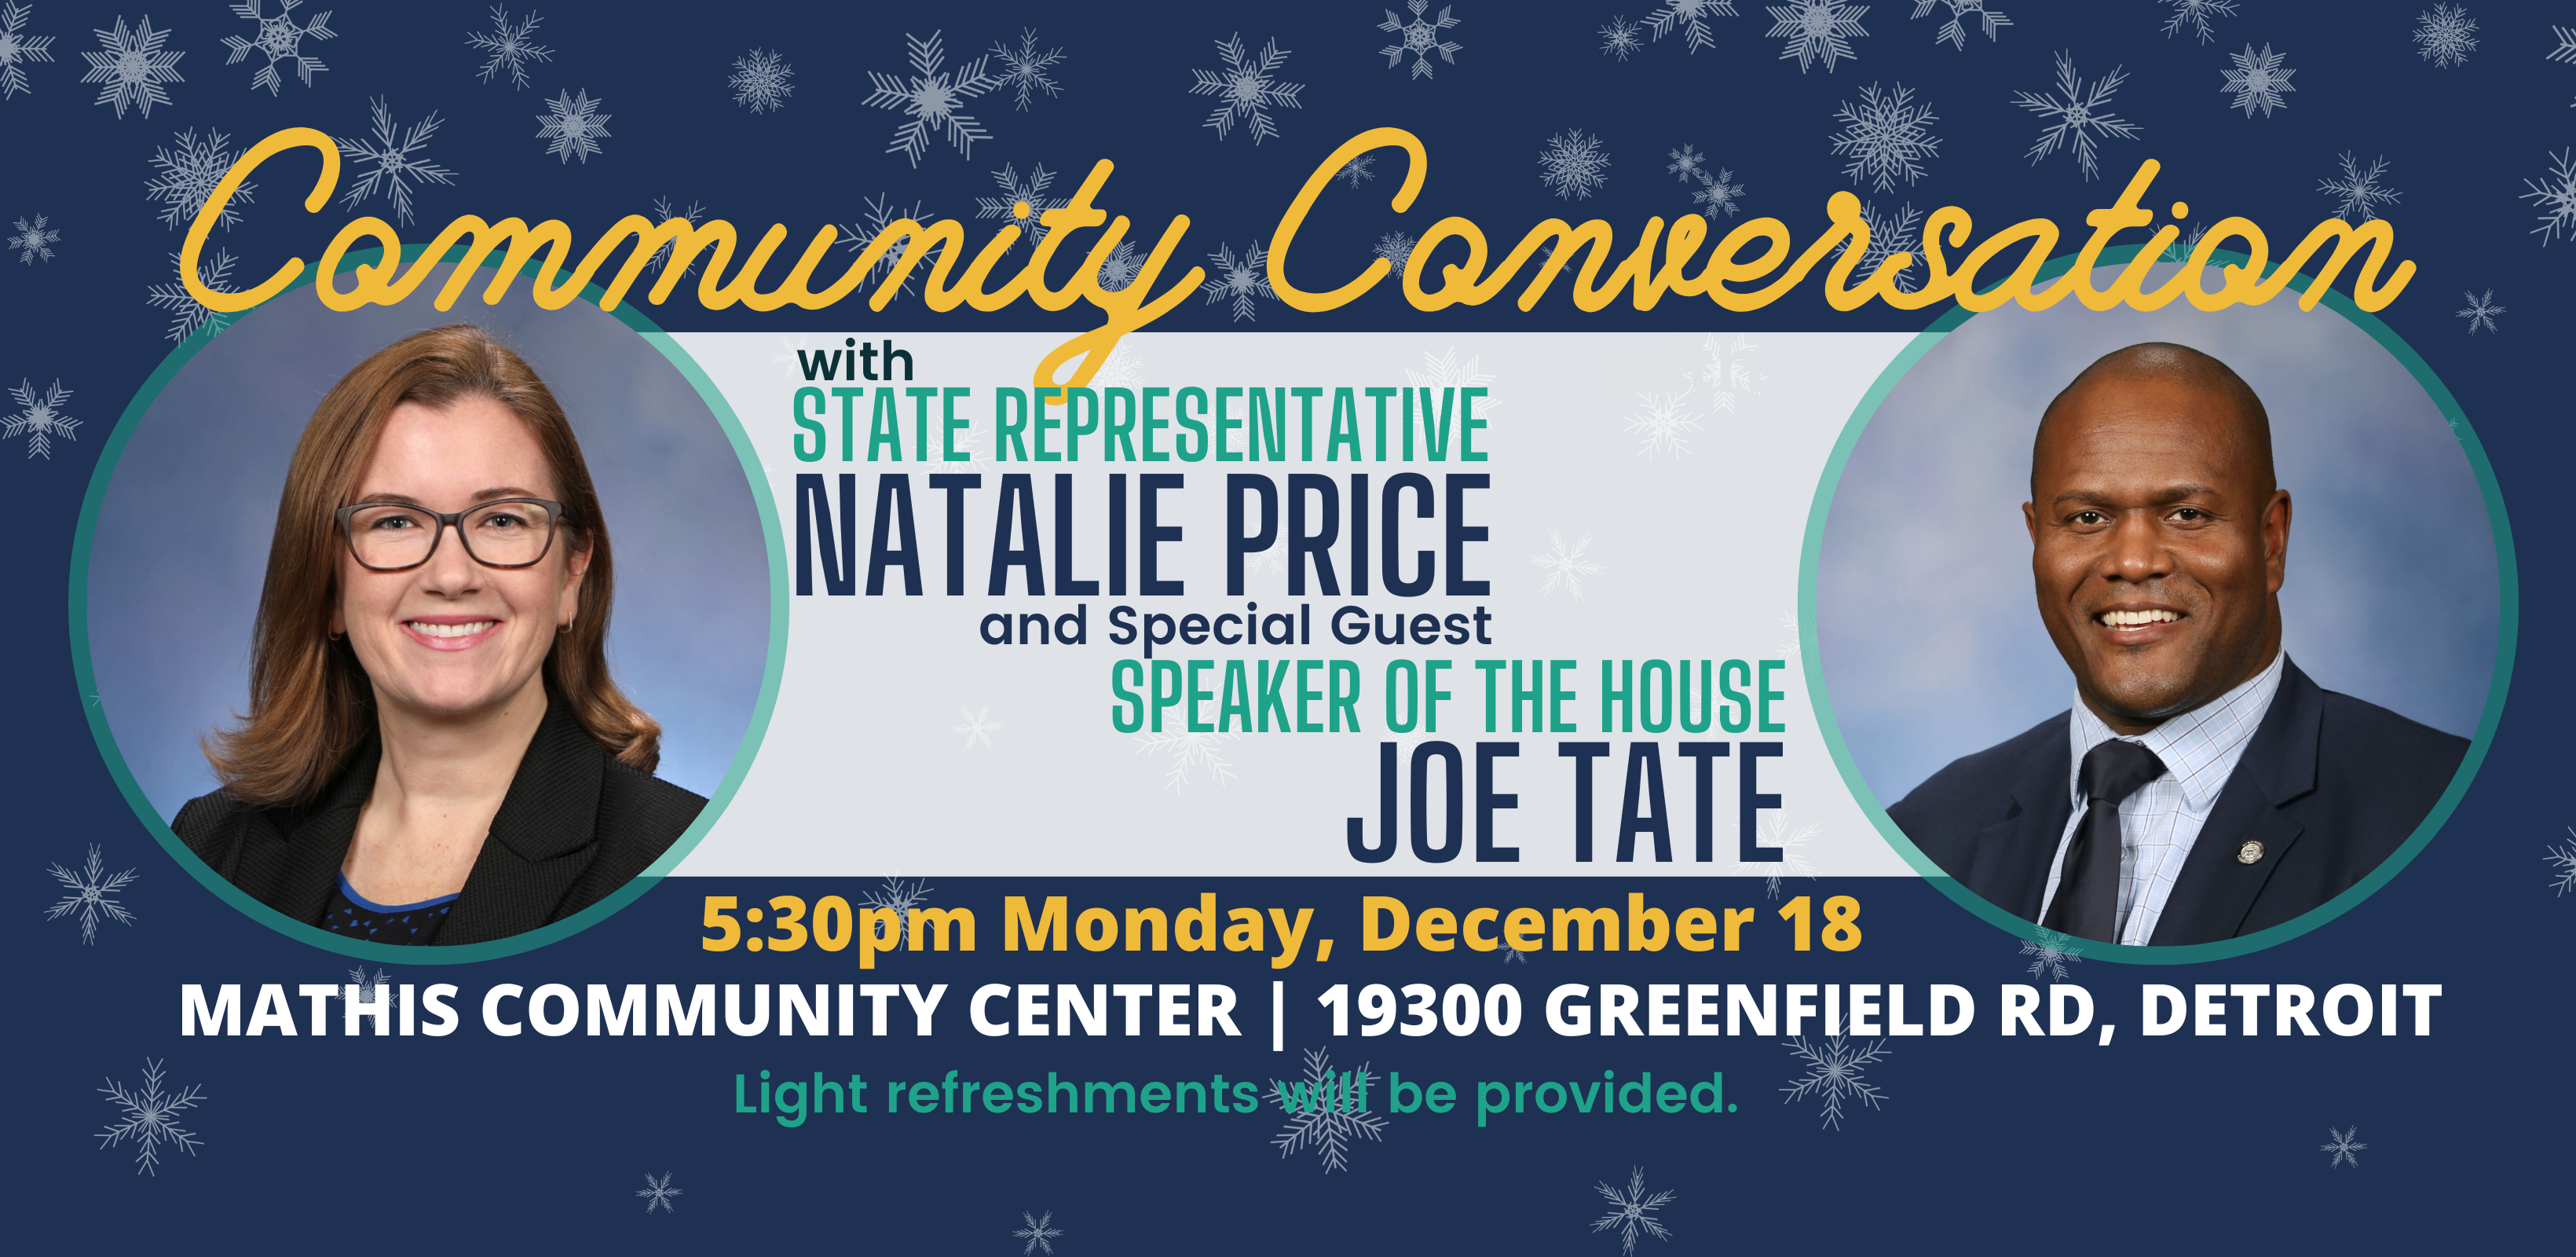 Text reads "Community conversation with state Representative Natalie Price and special guest Speaker of the House Joe Tate. 5:30pm Monday, December 18. Mathis Community Center, 19300 Greenfield Rd, Detroit. Light refreshments will be provided" on a blue background with snowflake illustrations. Flanking the text are headshots of Rep. Price and Speaker Tate.